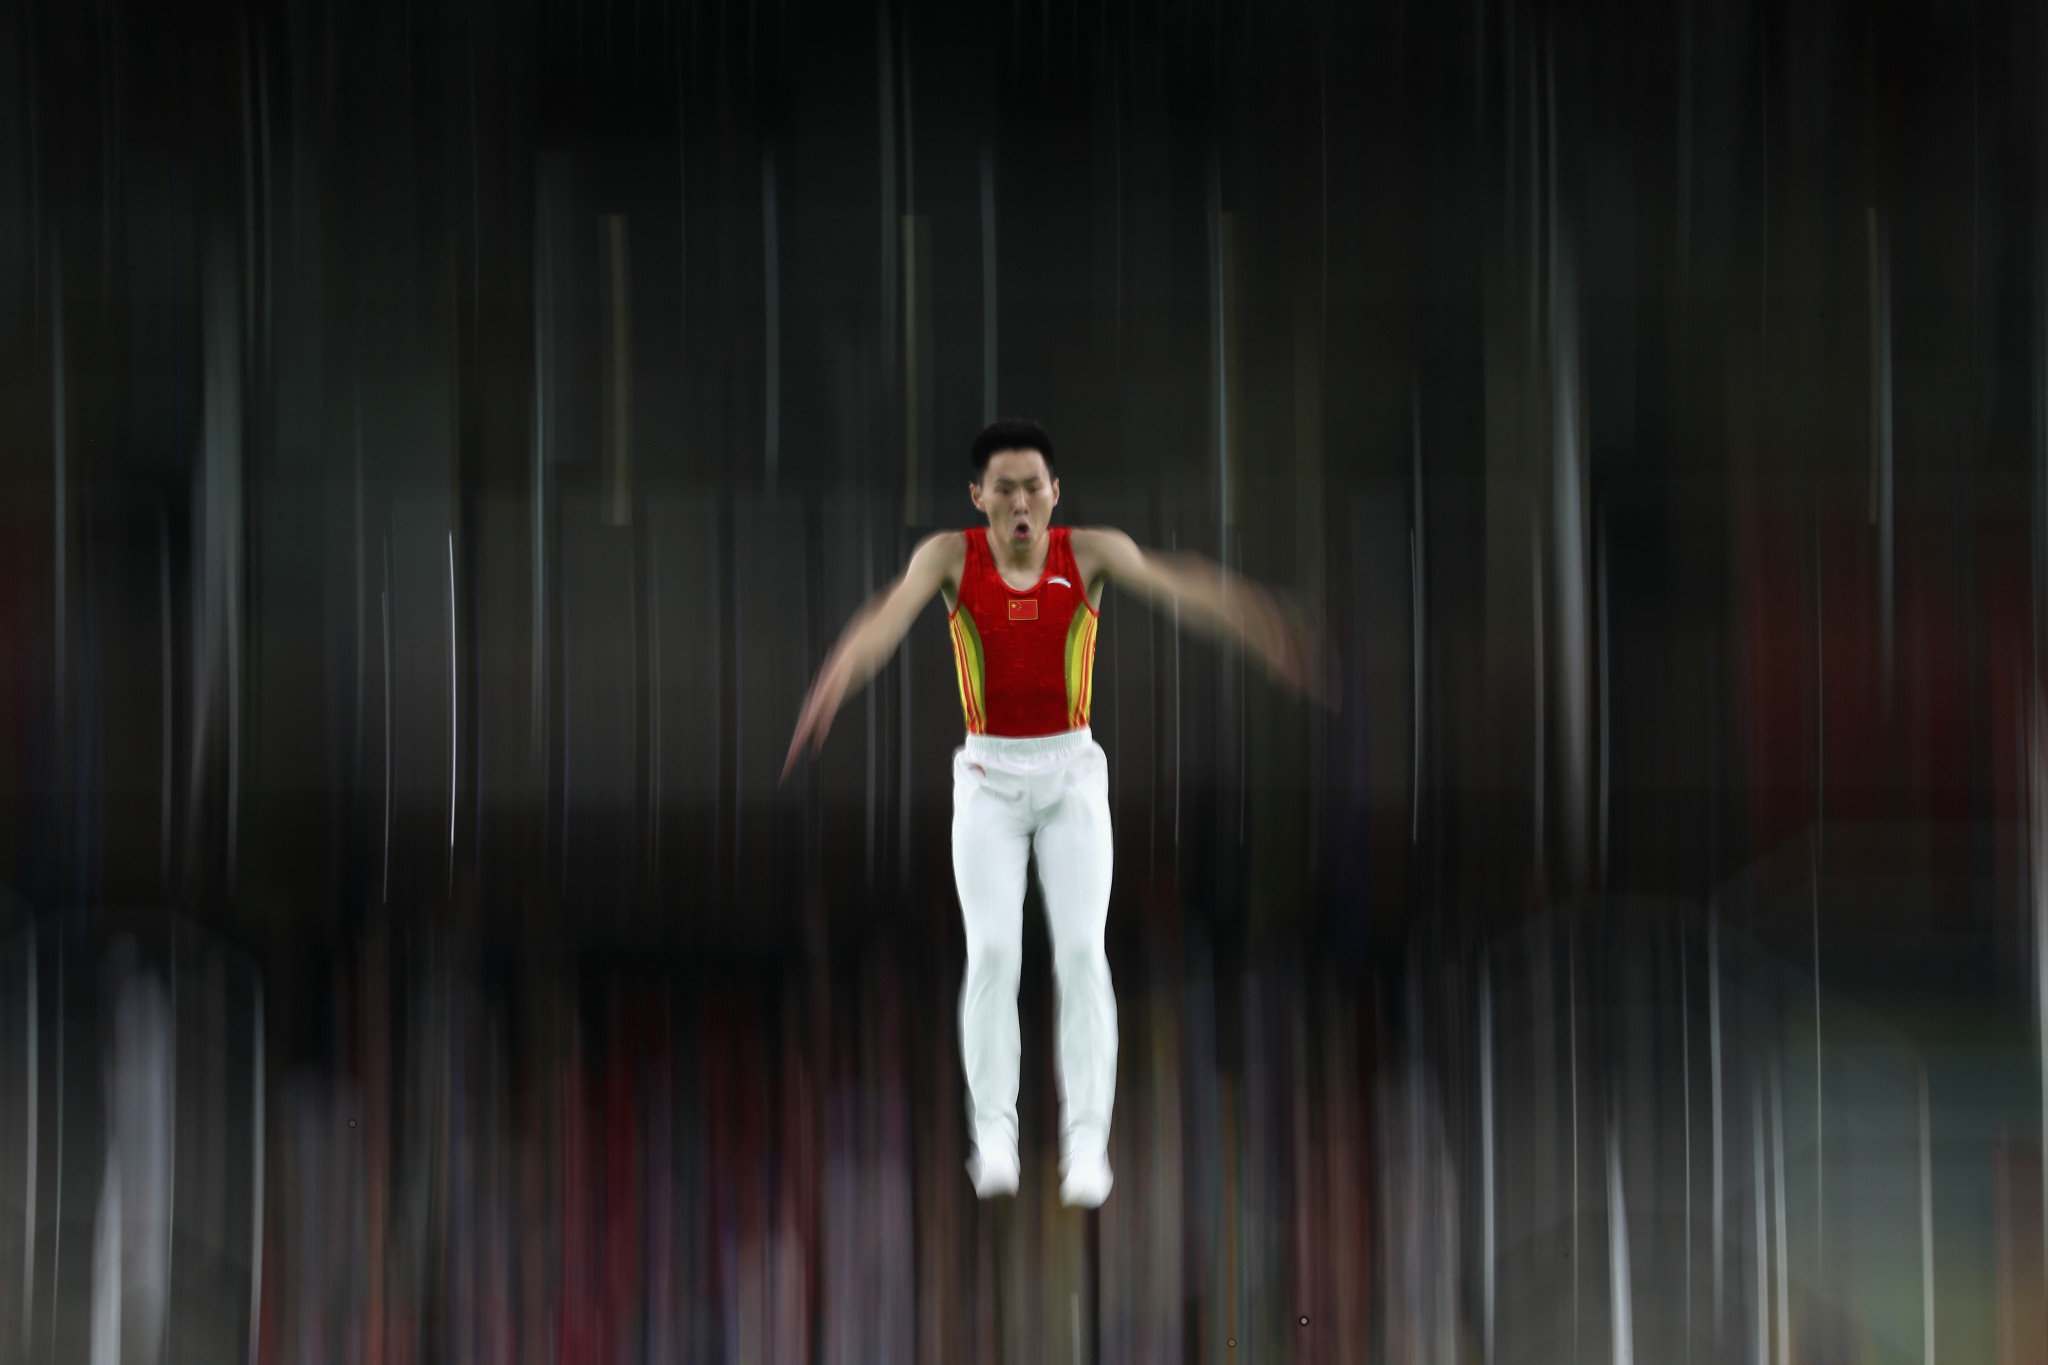 Chinese double at FIG Trampoline World Cup